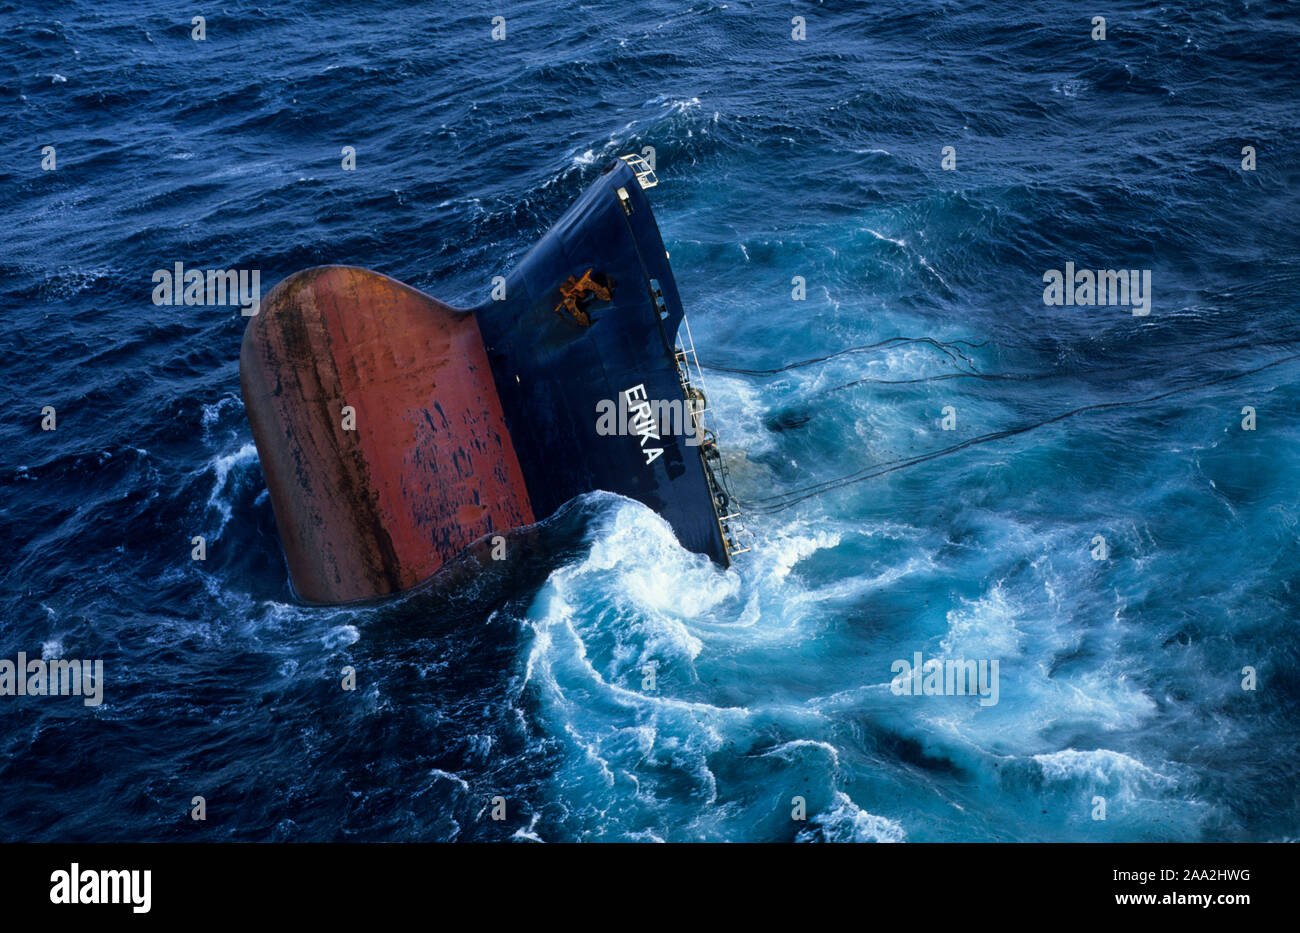 Oil spill caused by the sinking of the tanker Erika off the coasts of Brittany (north-western France) on December 12, 1999. The oil tanker chartered by Total to carry 31,000 tonnes of heavy fuel oil broke in two in a storm off Penmarc'h: here, the sinking ship Stock Photo